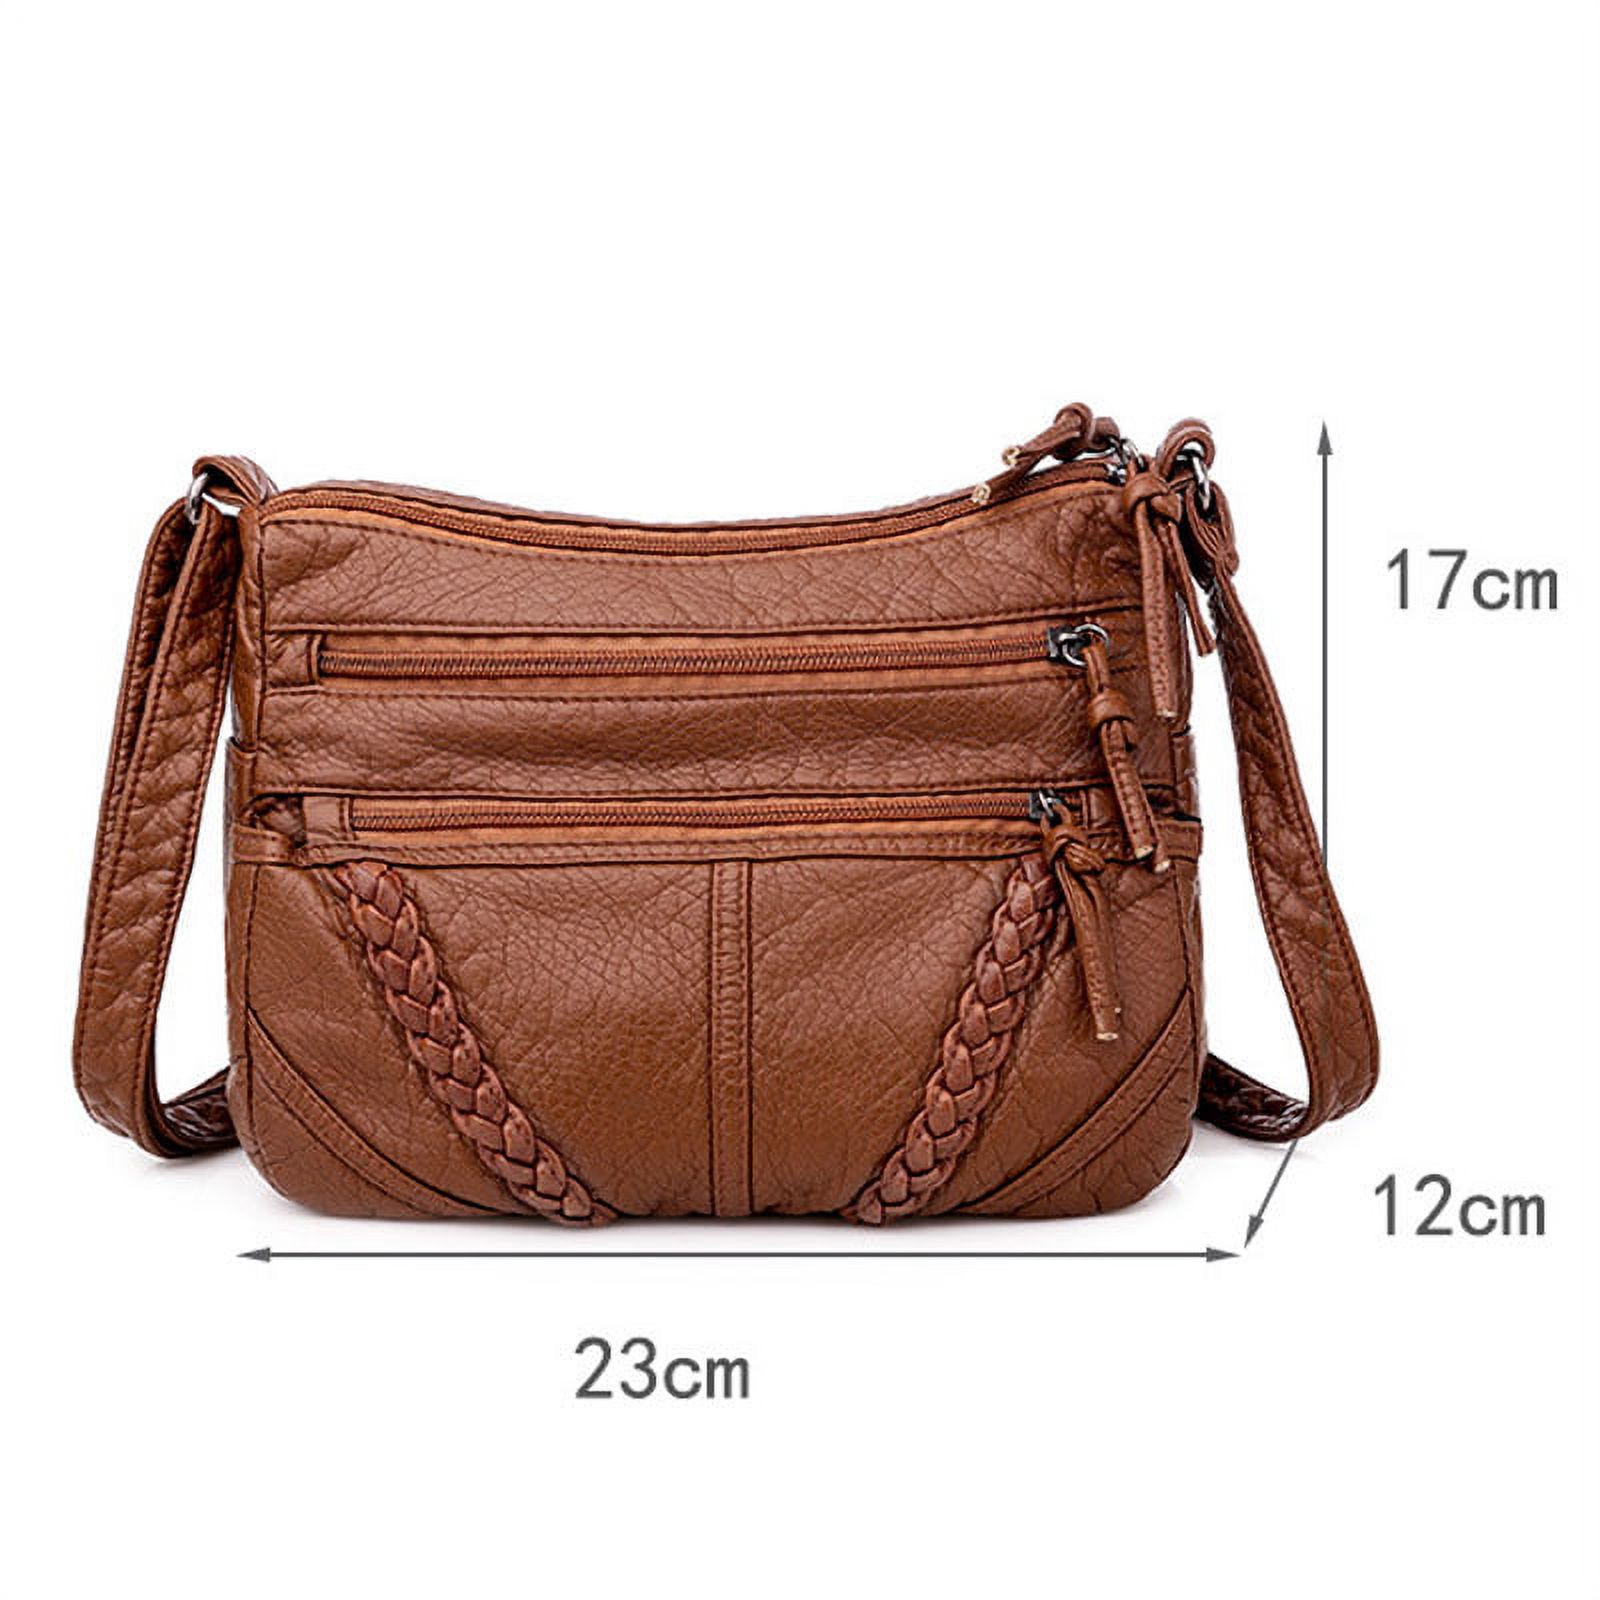 Ablanczoom Women's Soft Leather Shoulder Bags Classic Casual Crossbody ...